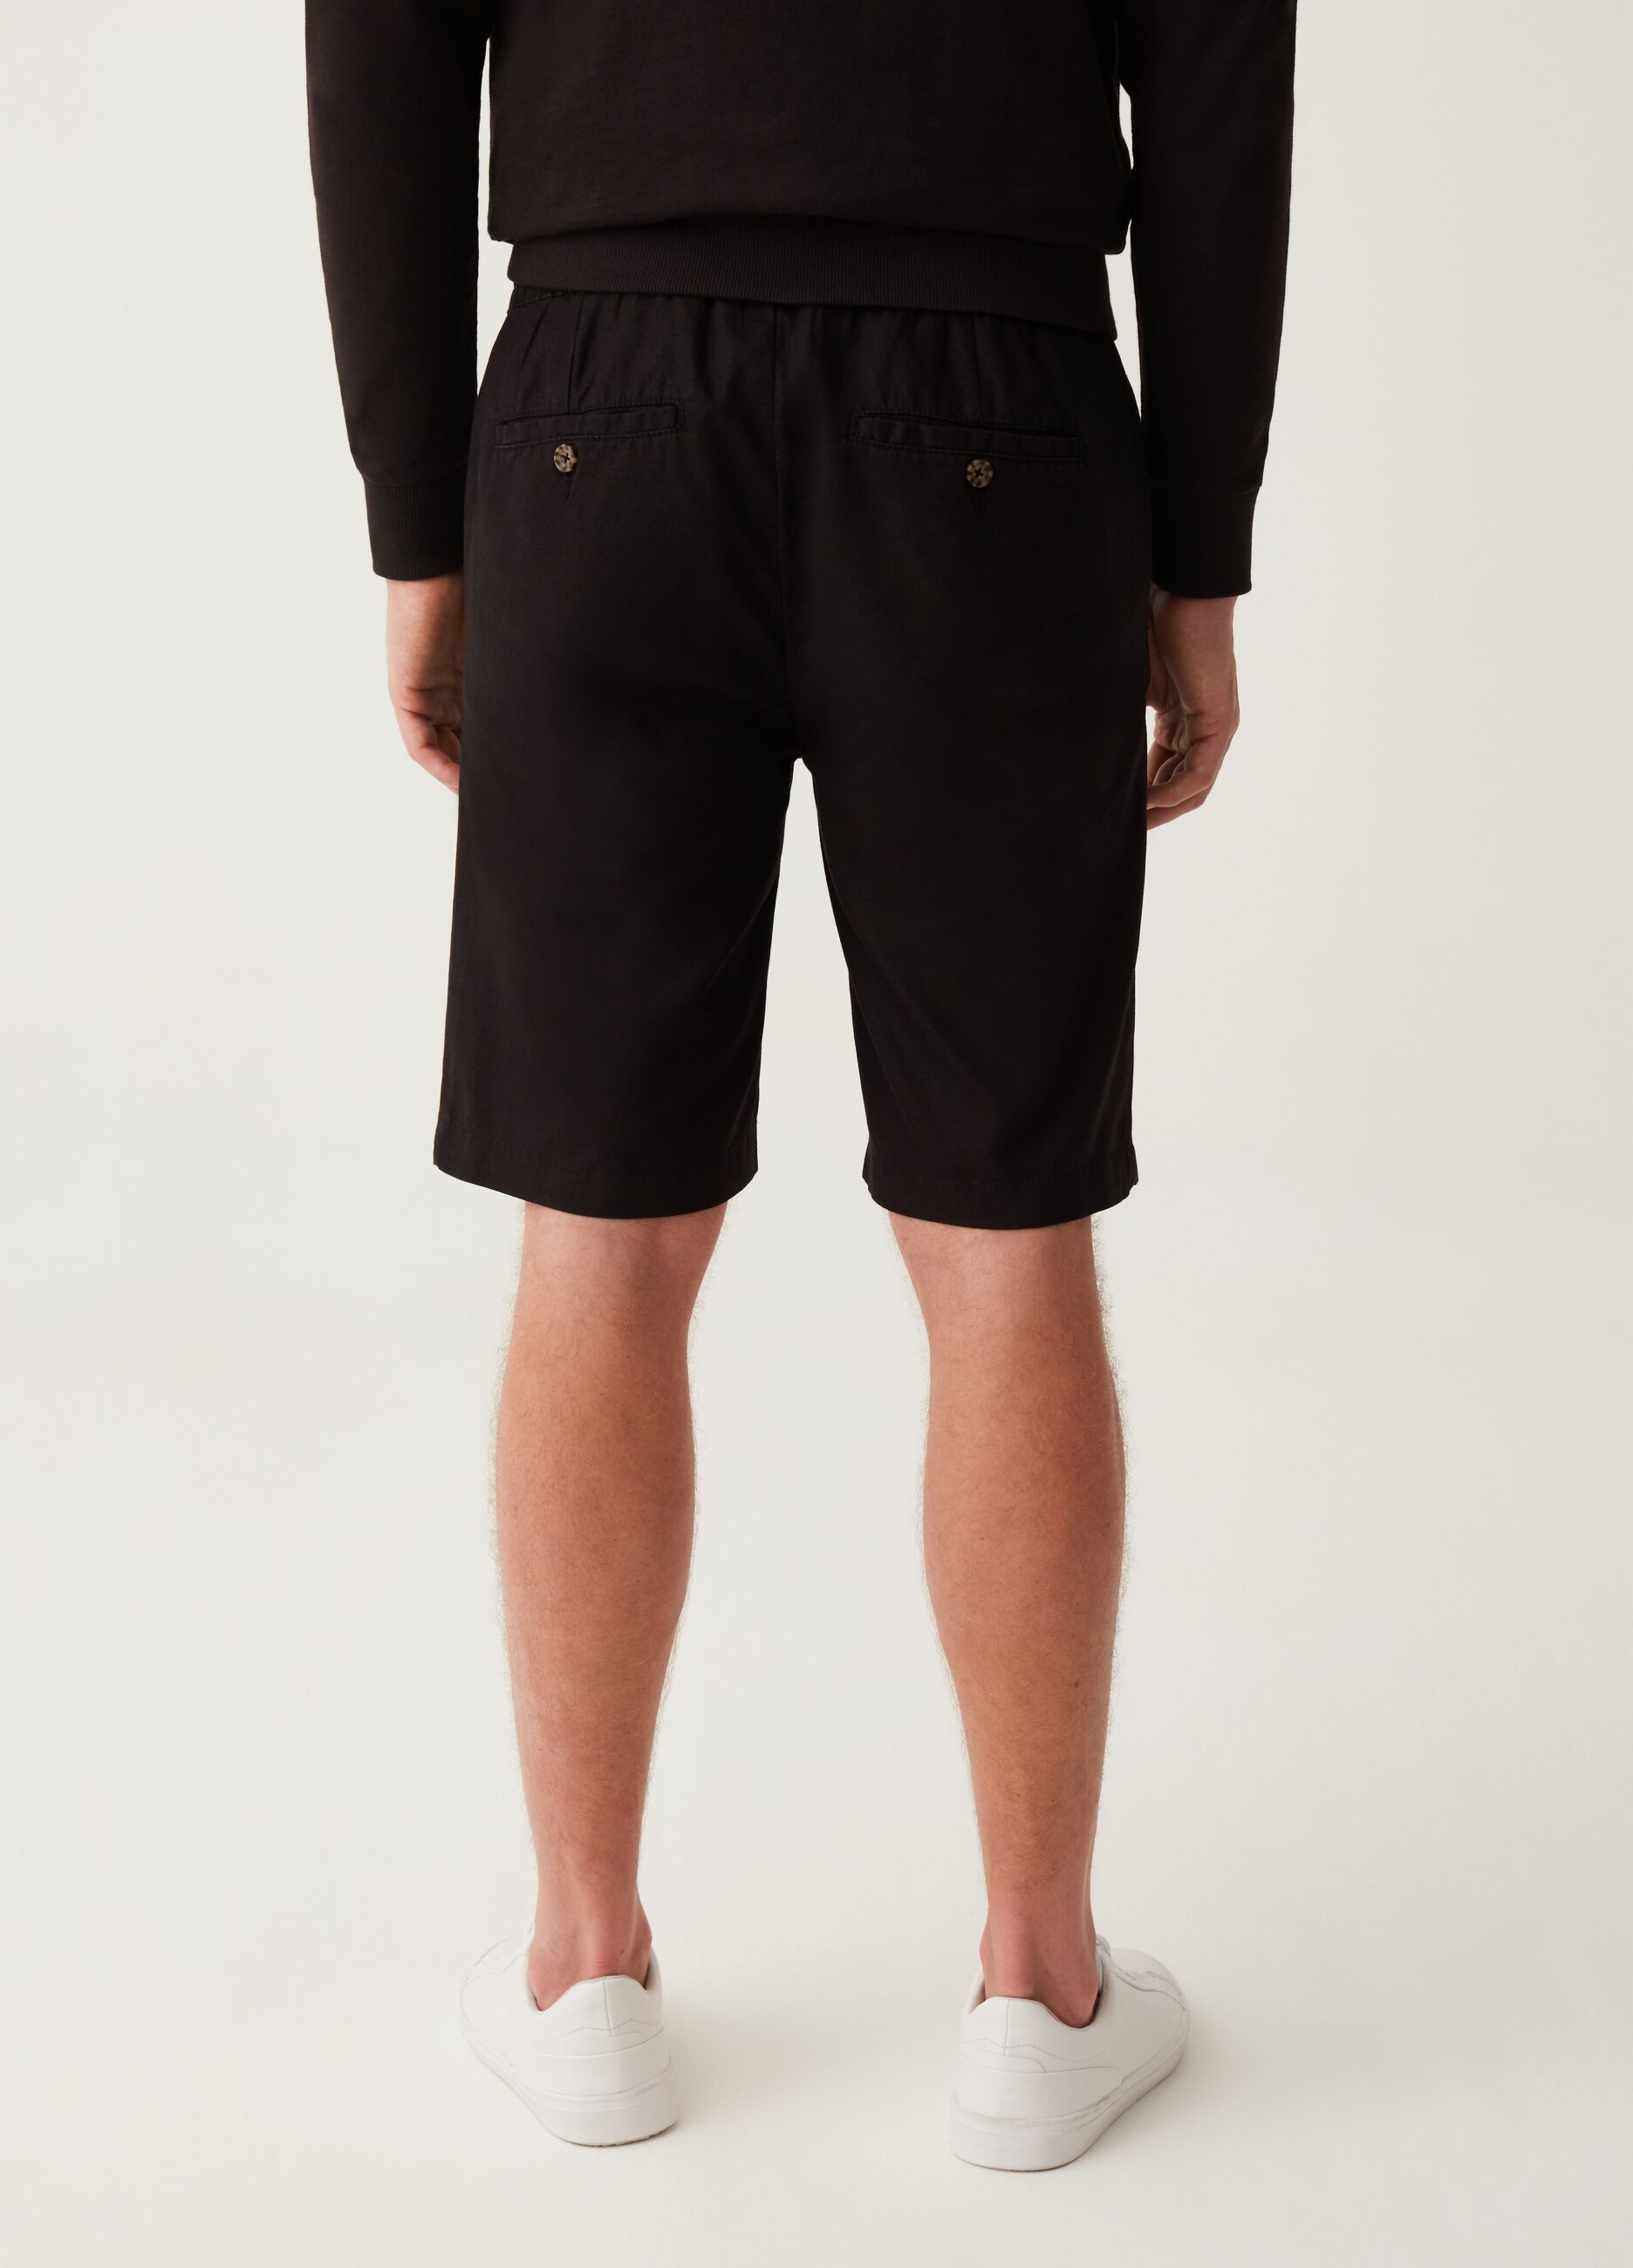 LESS IS BETTER Bermuda shorts in linen and cotton canvas